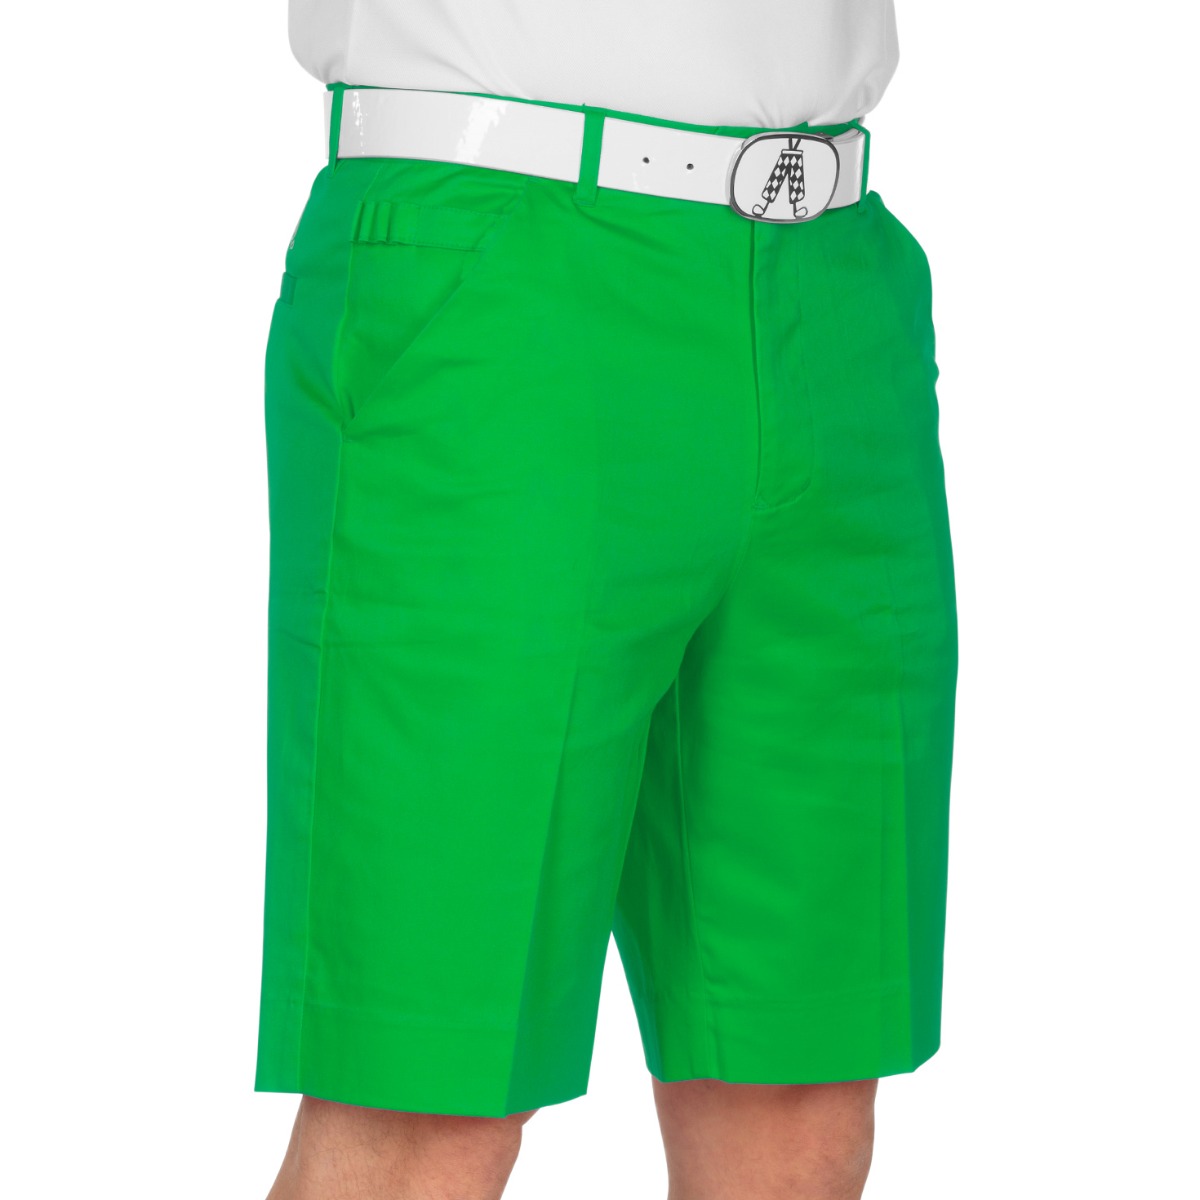 Green Golf Shorts With Free Multitool & Delivery | Bright Funky